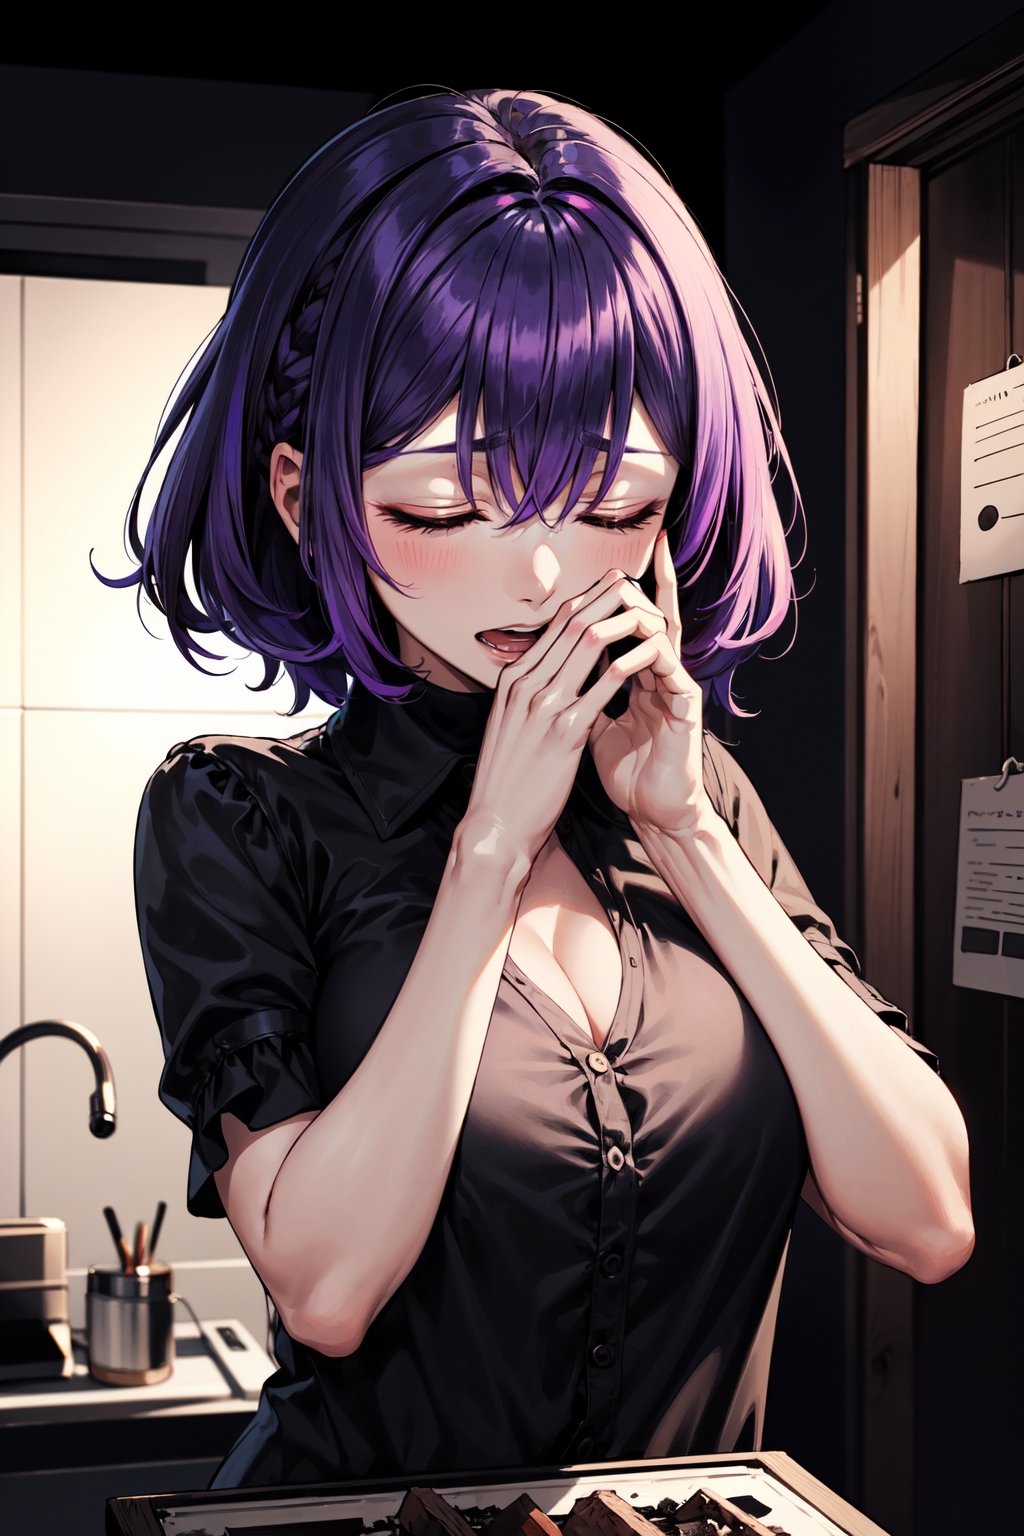 ink,horror nice, high quality
short medium shot
lonely young screaming,
with hands touching face
purple hair, closed eyes, brown skin, busty
purple blouse